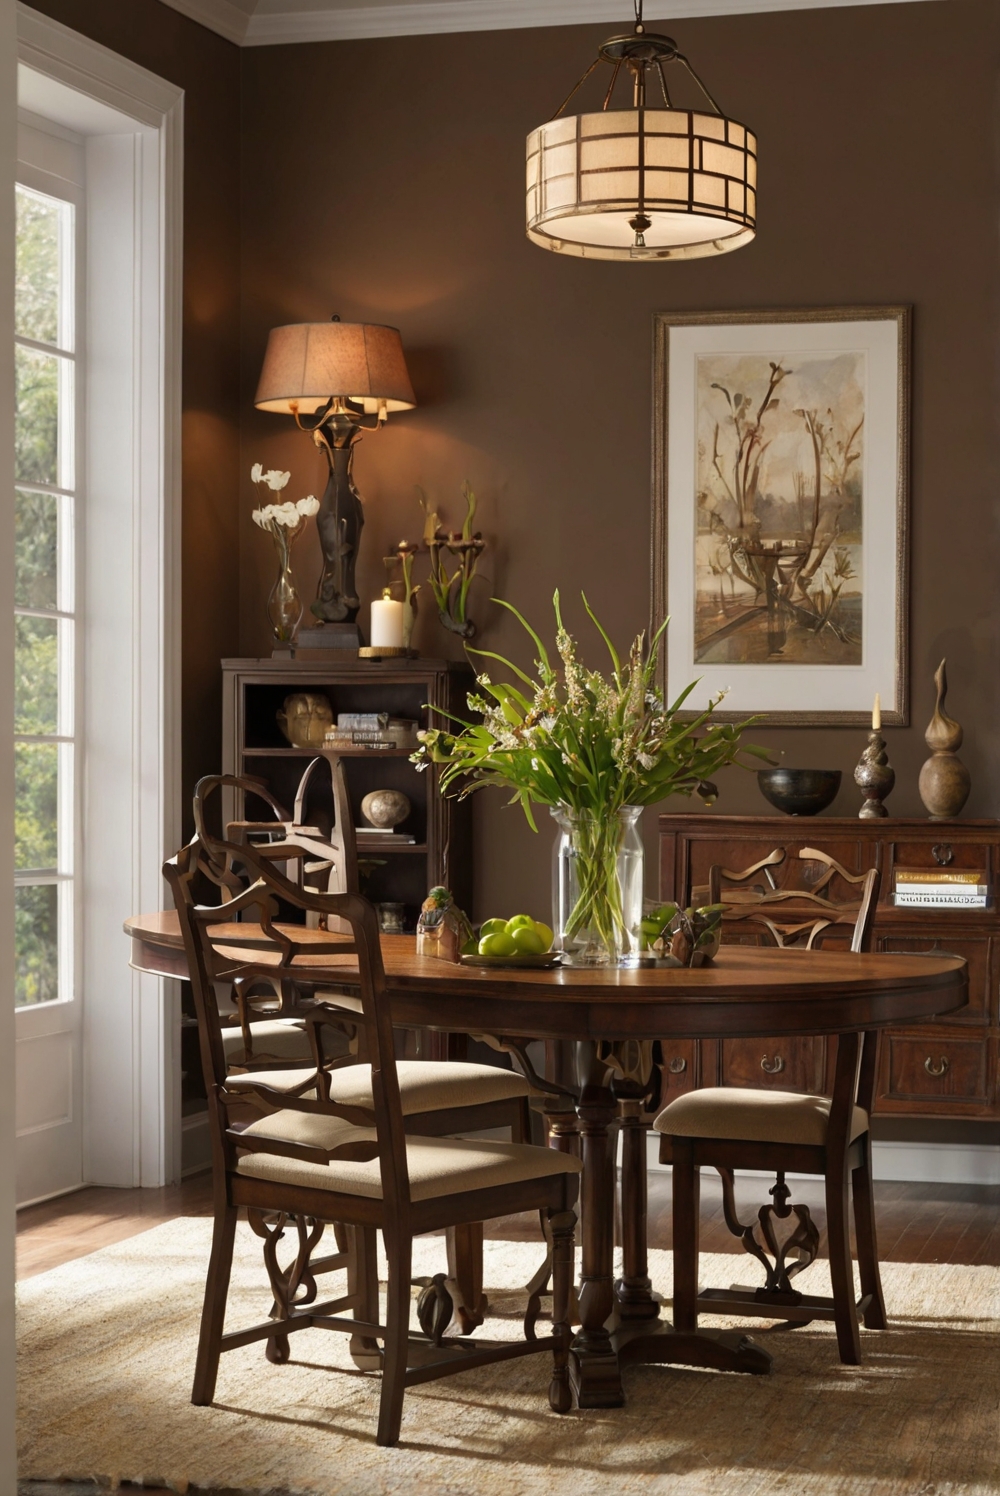 5 Ideas for Decorating with Brown Painted Furniture (Enhance Your Space with Brown Accents)